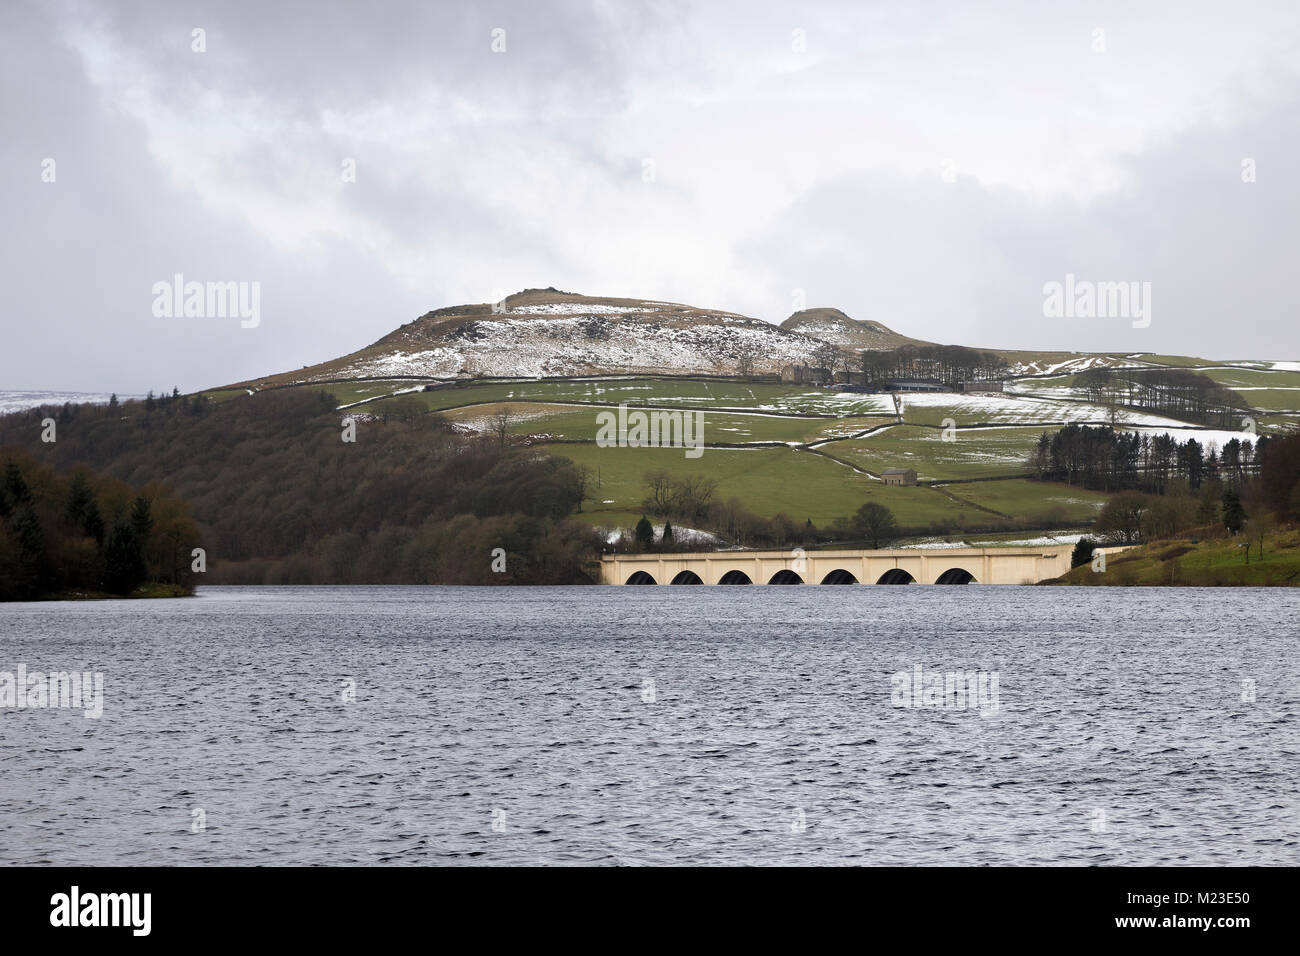 An image of Ladybower Reservoir situated in the Upper Derwent Valley, Derbyshire, England, UK. Stock Photo